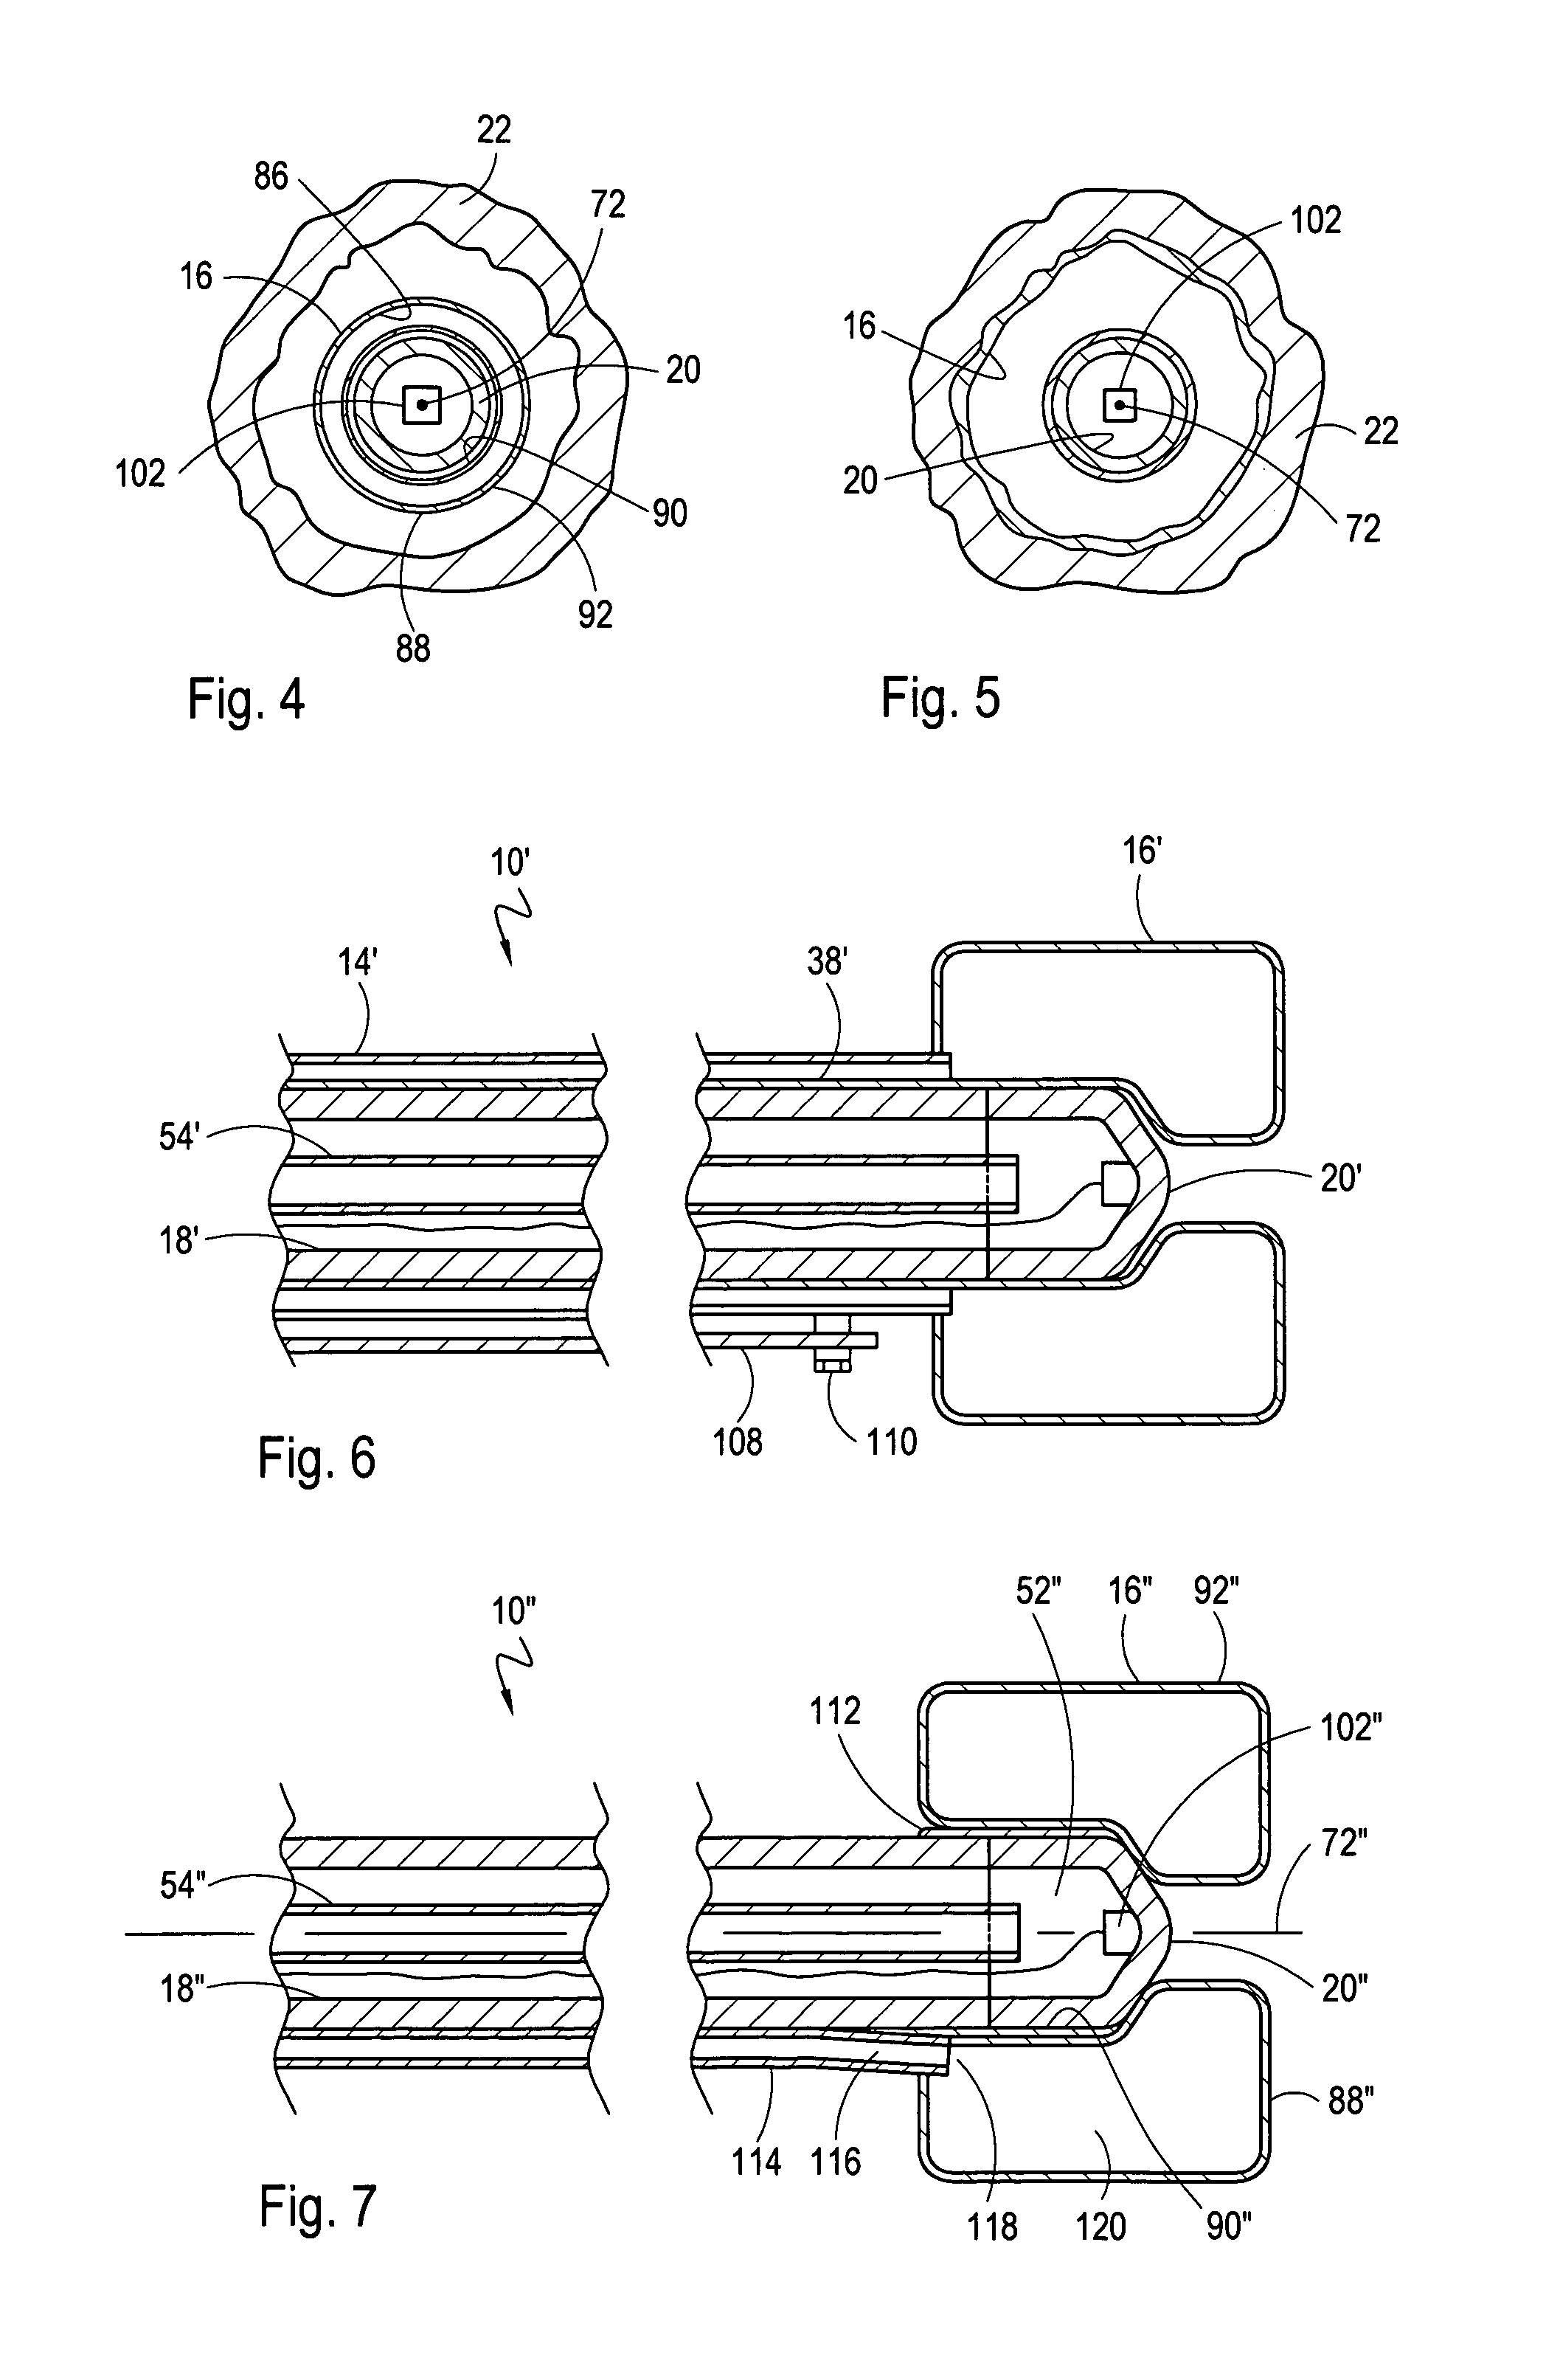 Catheter system for performing a single step cryoablation